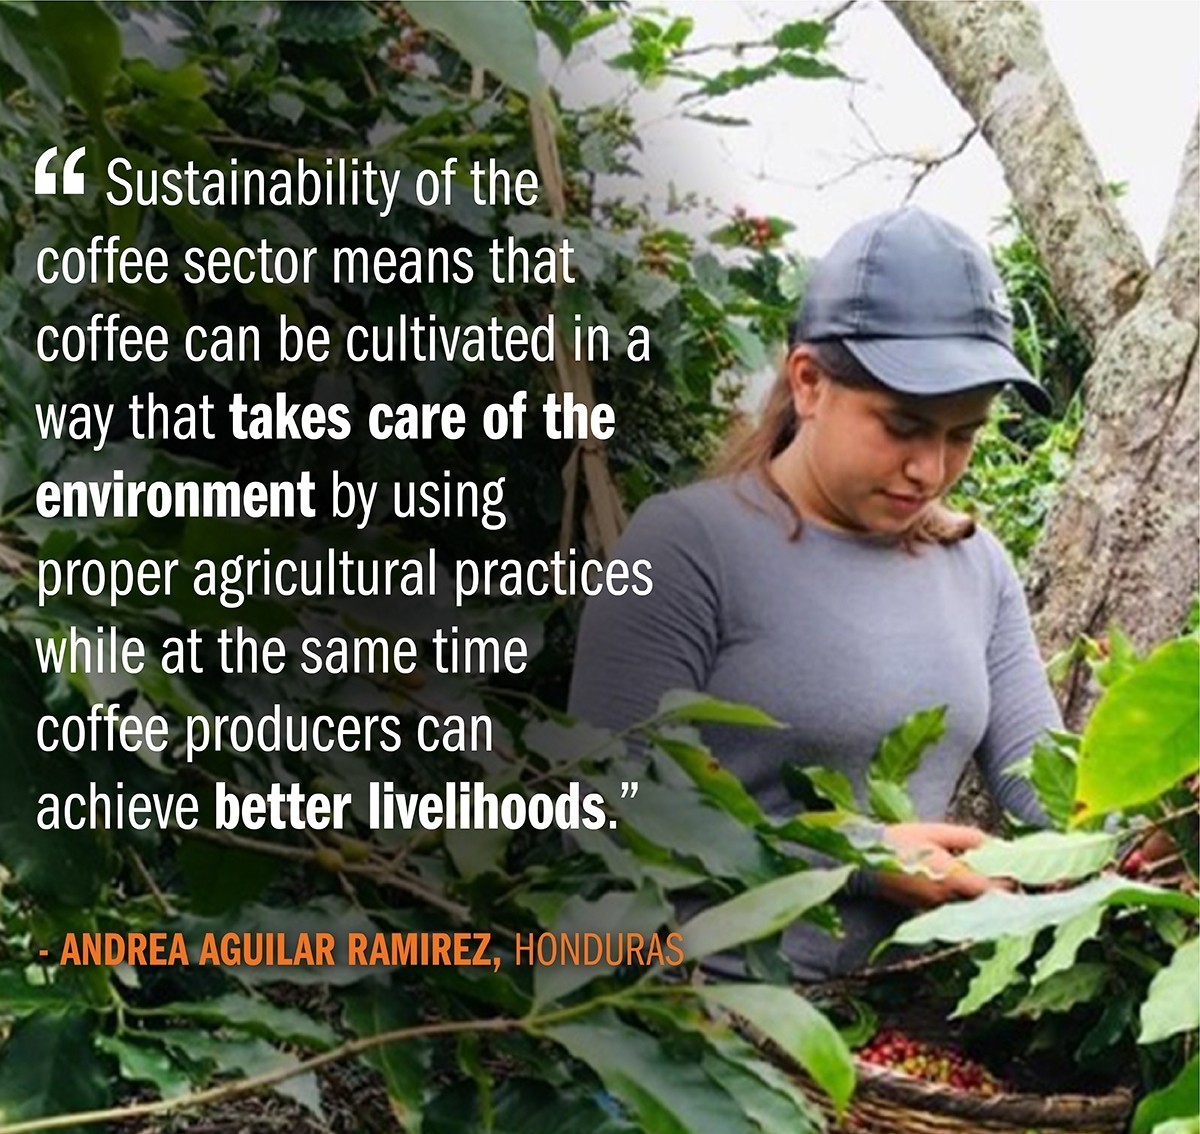 Photo of Honduran coffee farmer harvesting coffee with a quote overlaid